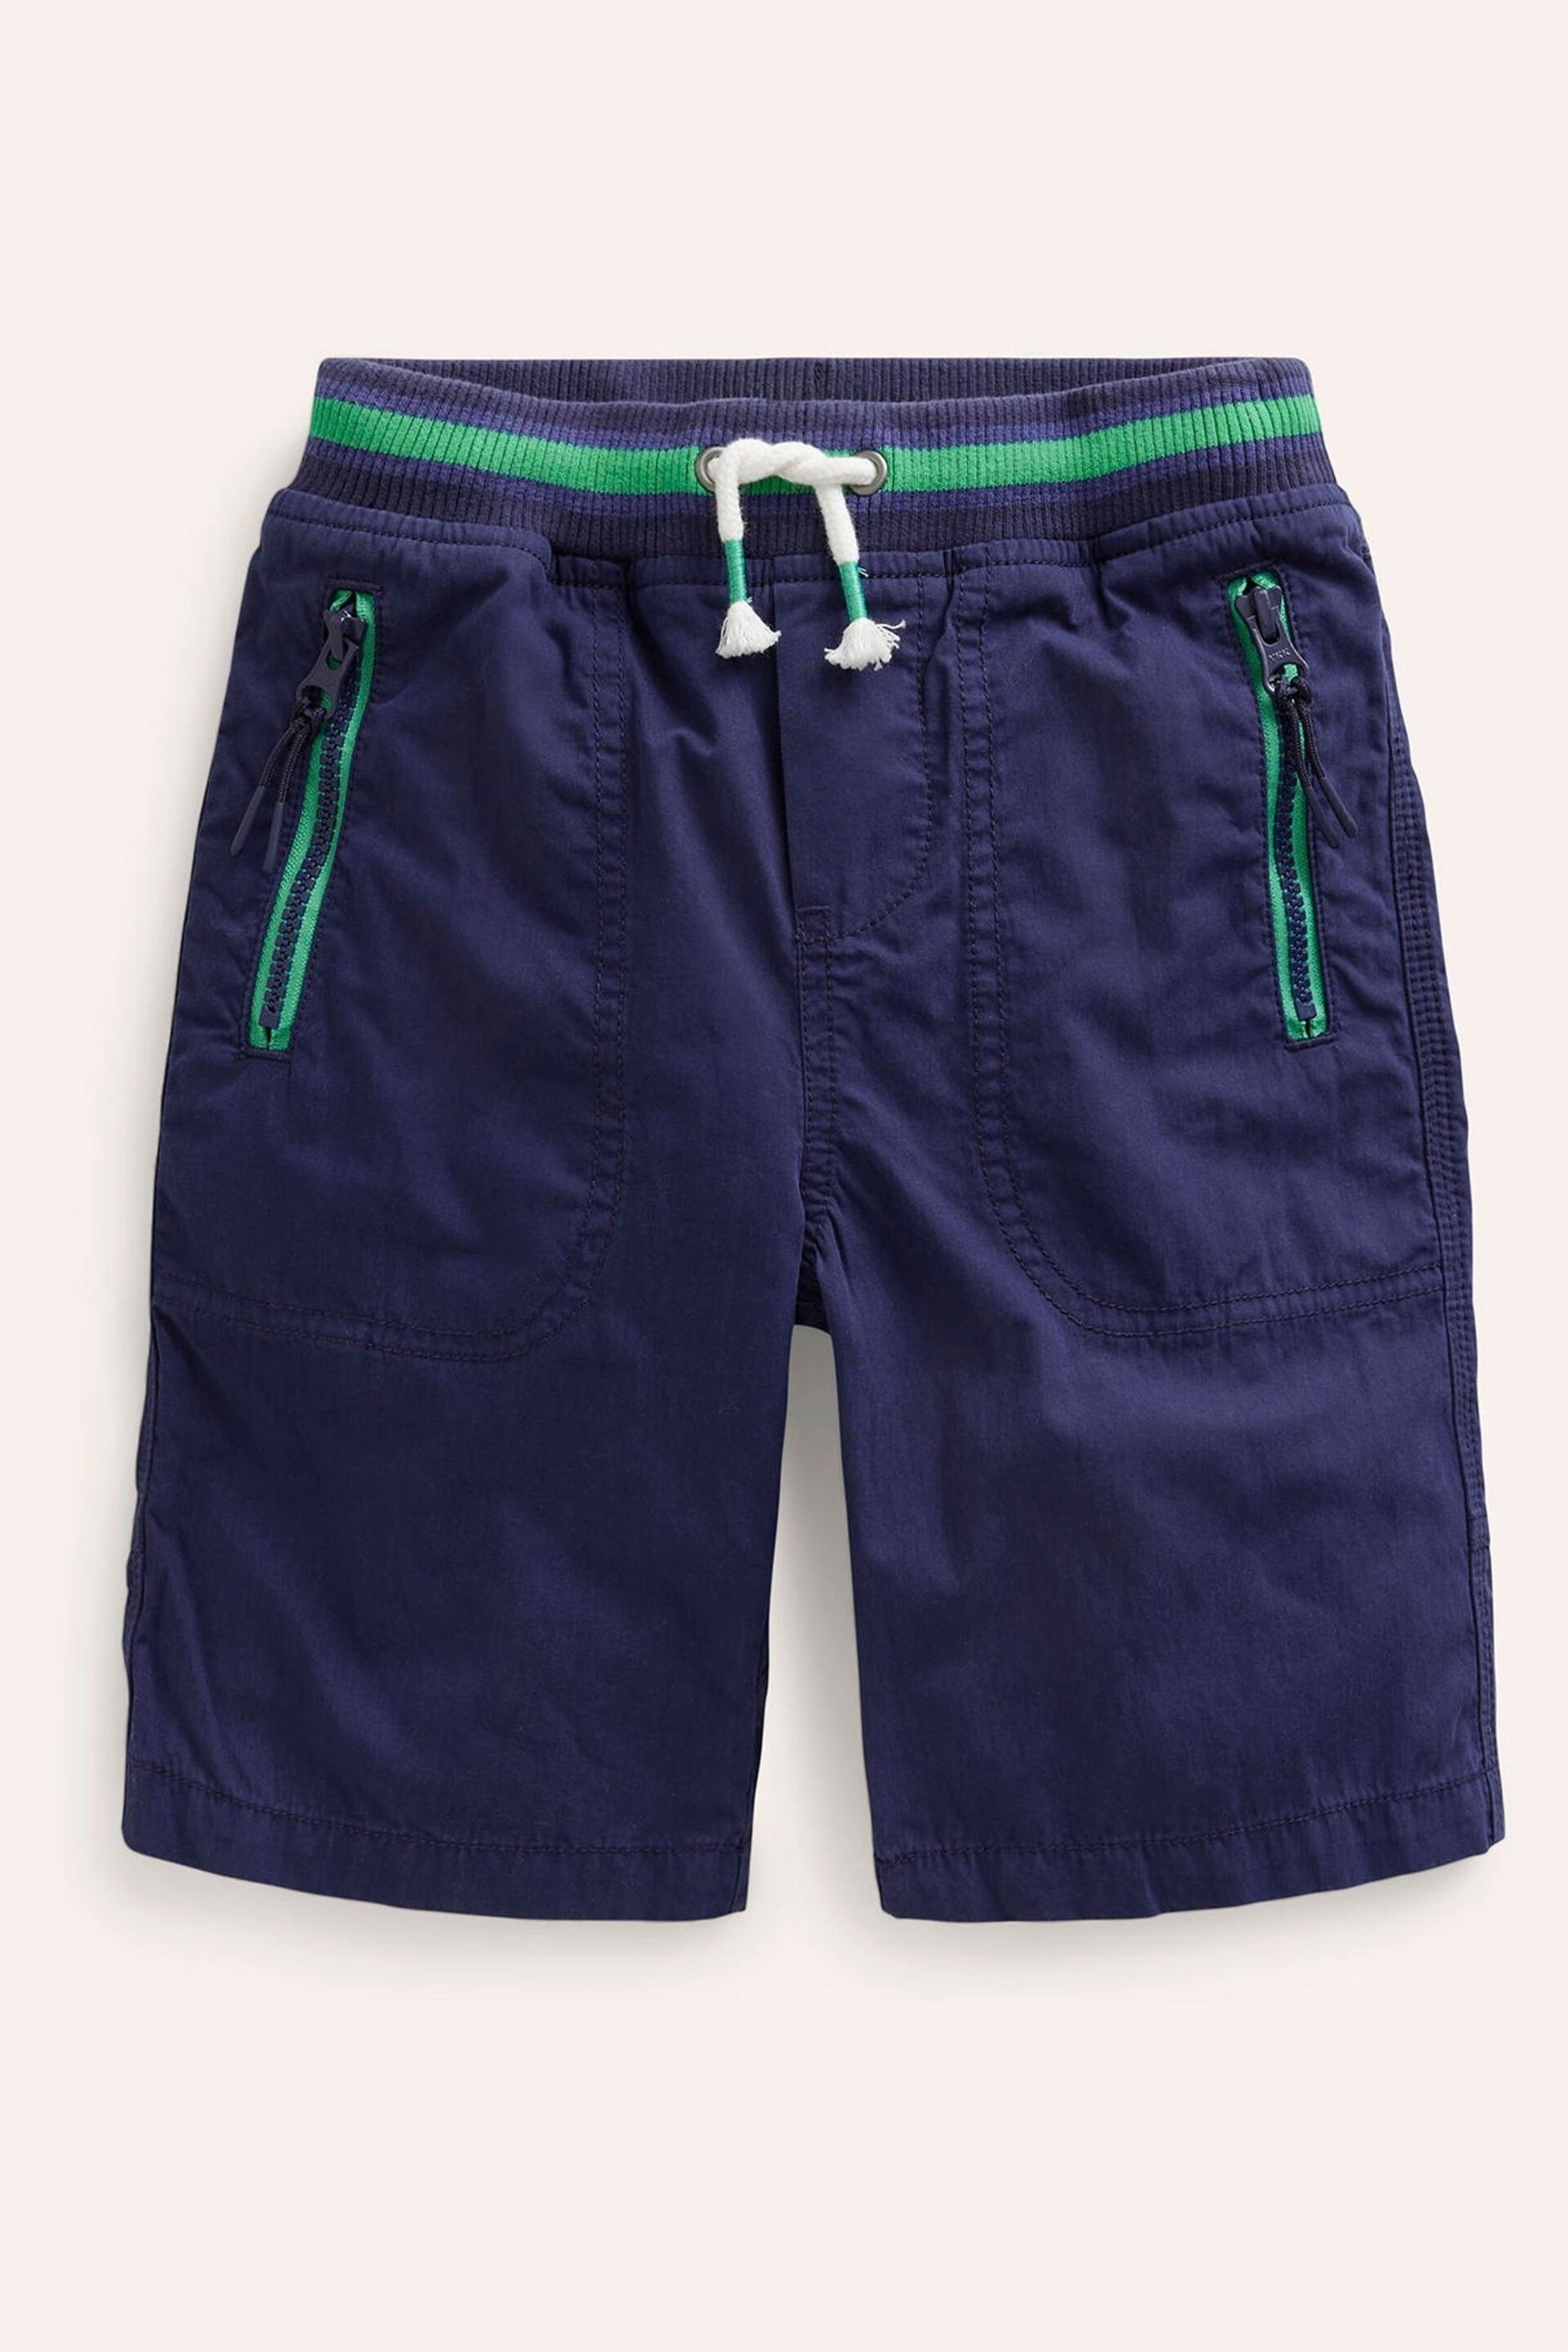 Boden Blue Adventure Shorts - Image 1 of 3